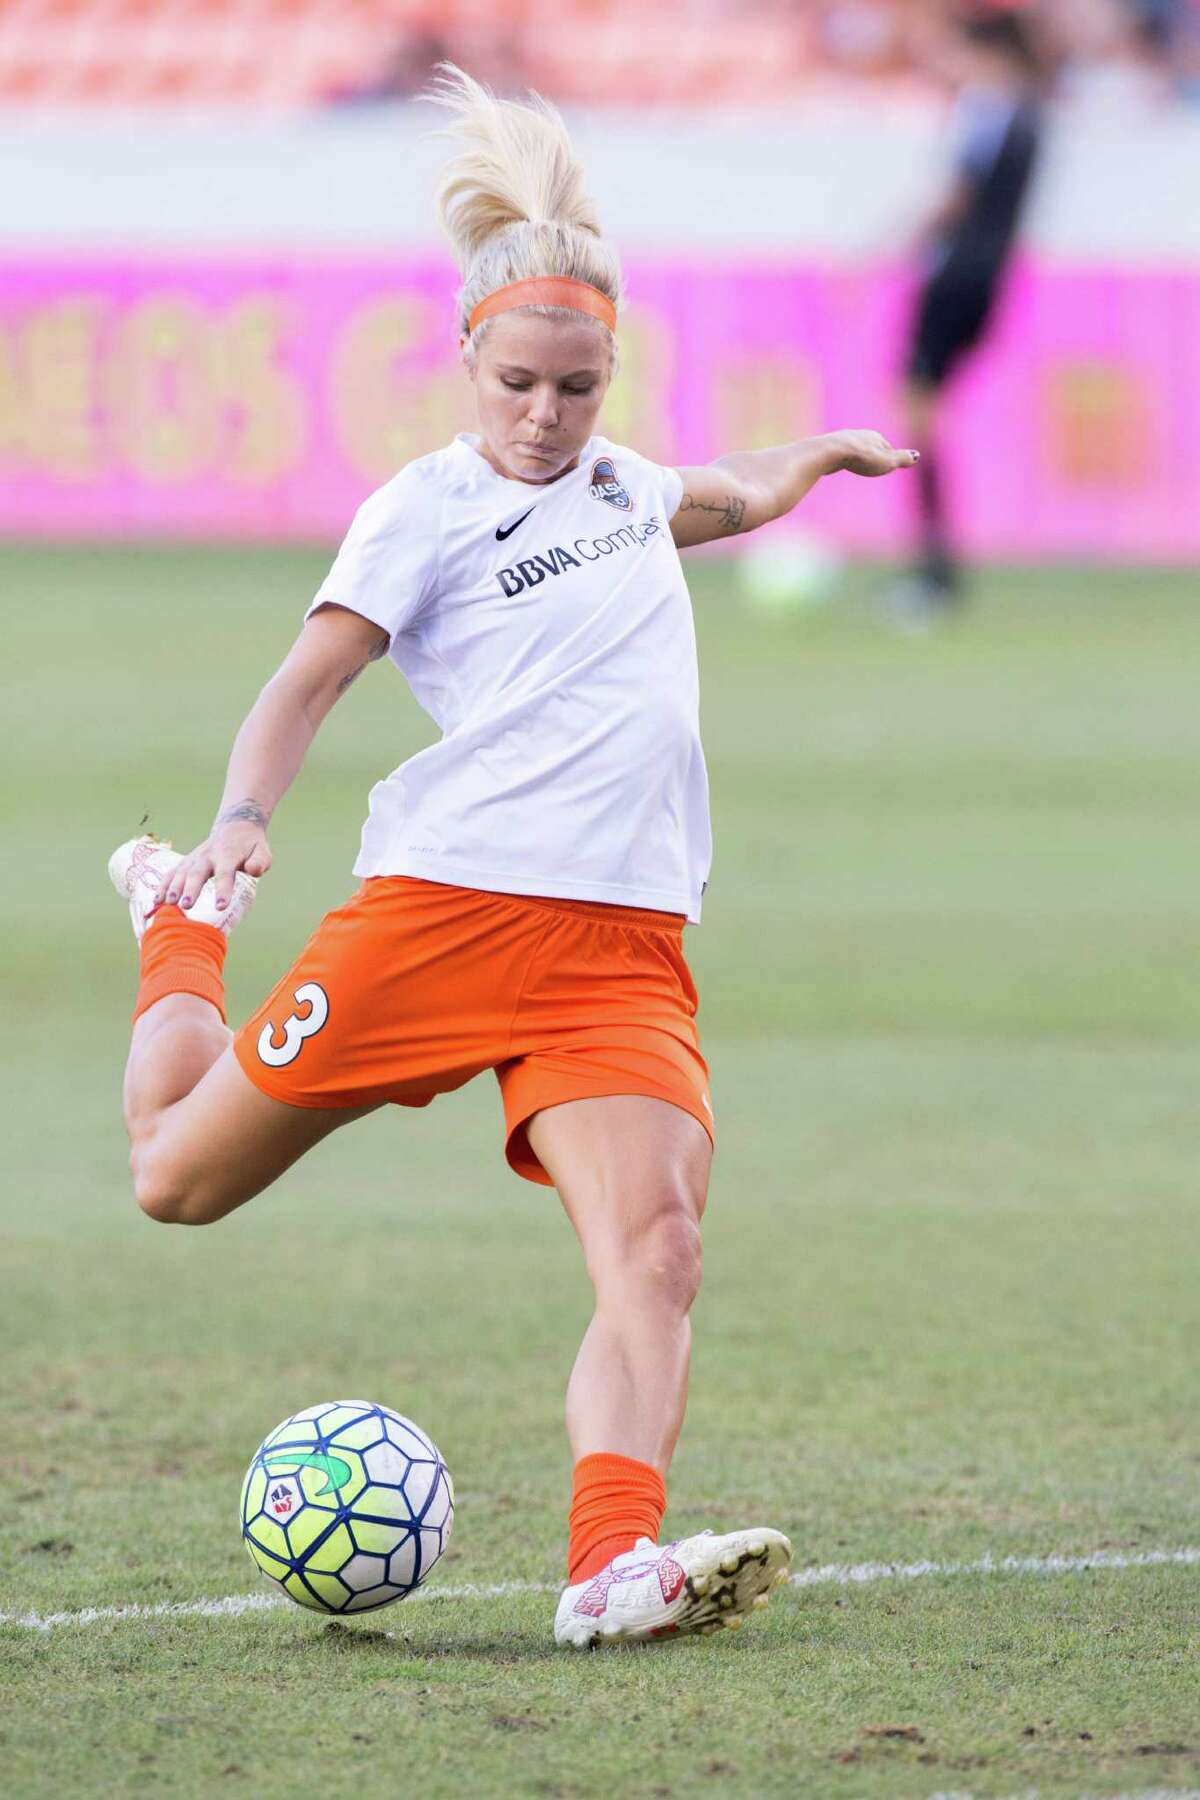 Houston Dash forward Rachel Daly (3) warms up on the field against the FC Kansas City before action between the Houston Dash and the FC Kansas City during a soccer game at BBVA Compass, Sunday, June 19, 2016, in Houston. FC Kansas City defeated Houston Dash 1-0. ( Juan DeLeon / for the Houston Chronicle )